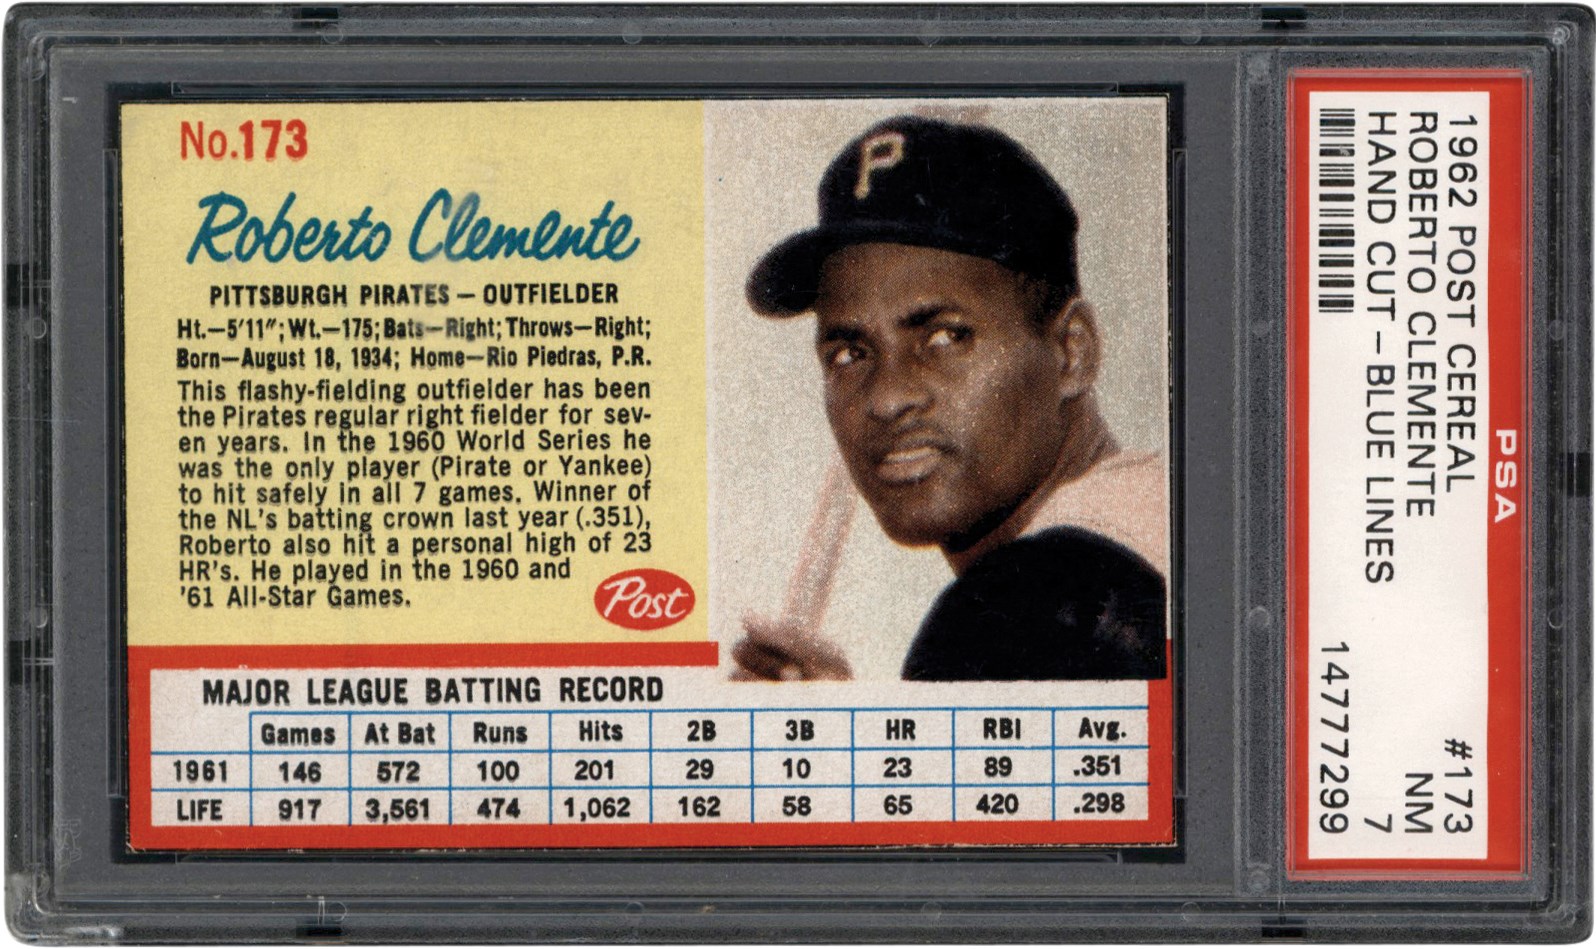 - 1962 Post Cereal Baseball #173 Roberto Clemente (Blue Lines) PSA NM 7 (Pop 1 of 2 - Only 1 Higher)